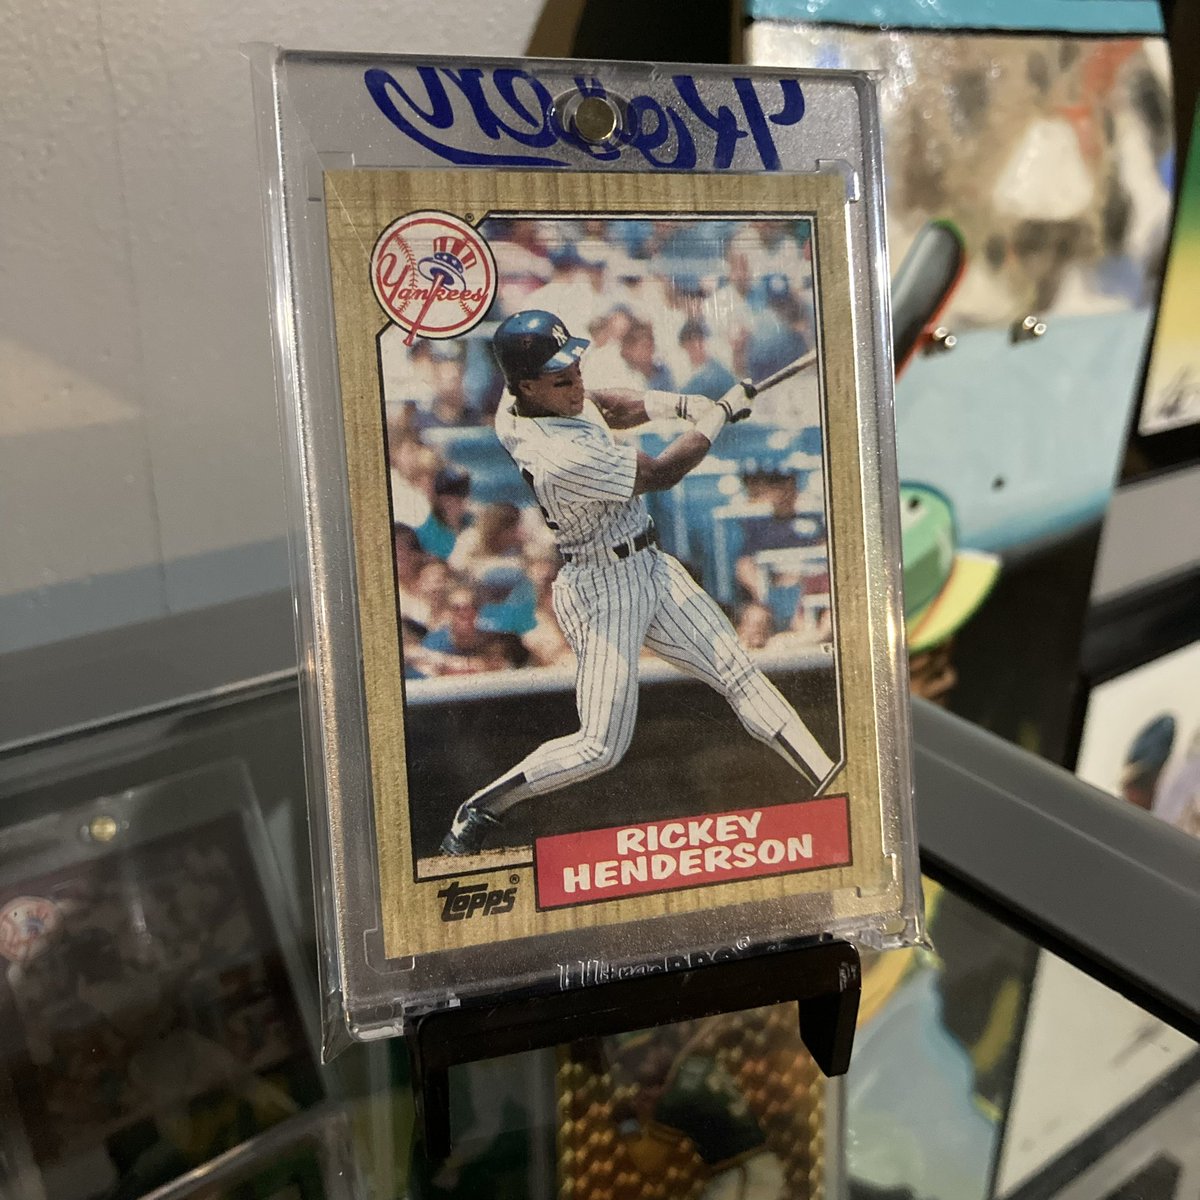 Today’s Rickey Henderson PC swag is this amazing #cardart from @MatthewLeeRosen honoring my Dad on a 1987 @Topps card! This was my first Rickey card and was a gift from my Dad for Christmas. Dad passed away 10 years ago today! Miss him…💚🔥👀🐐⚾️🏃🏿💨🧤#rickeyhenderson #thehobby